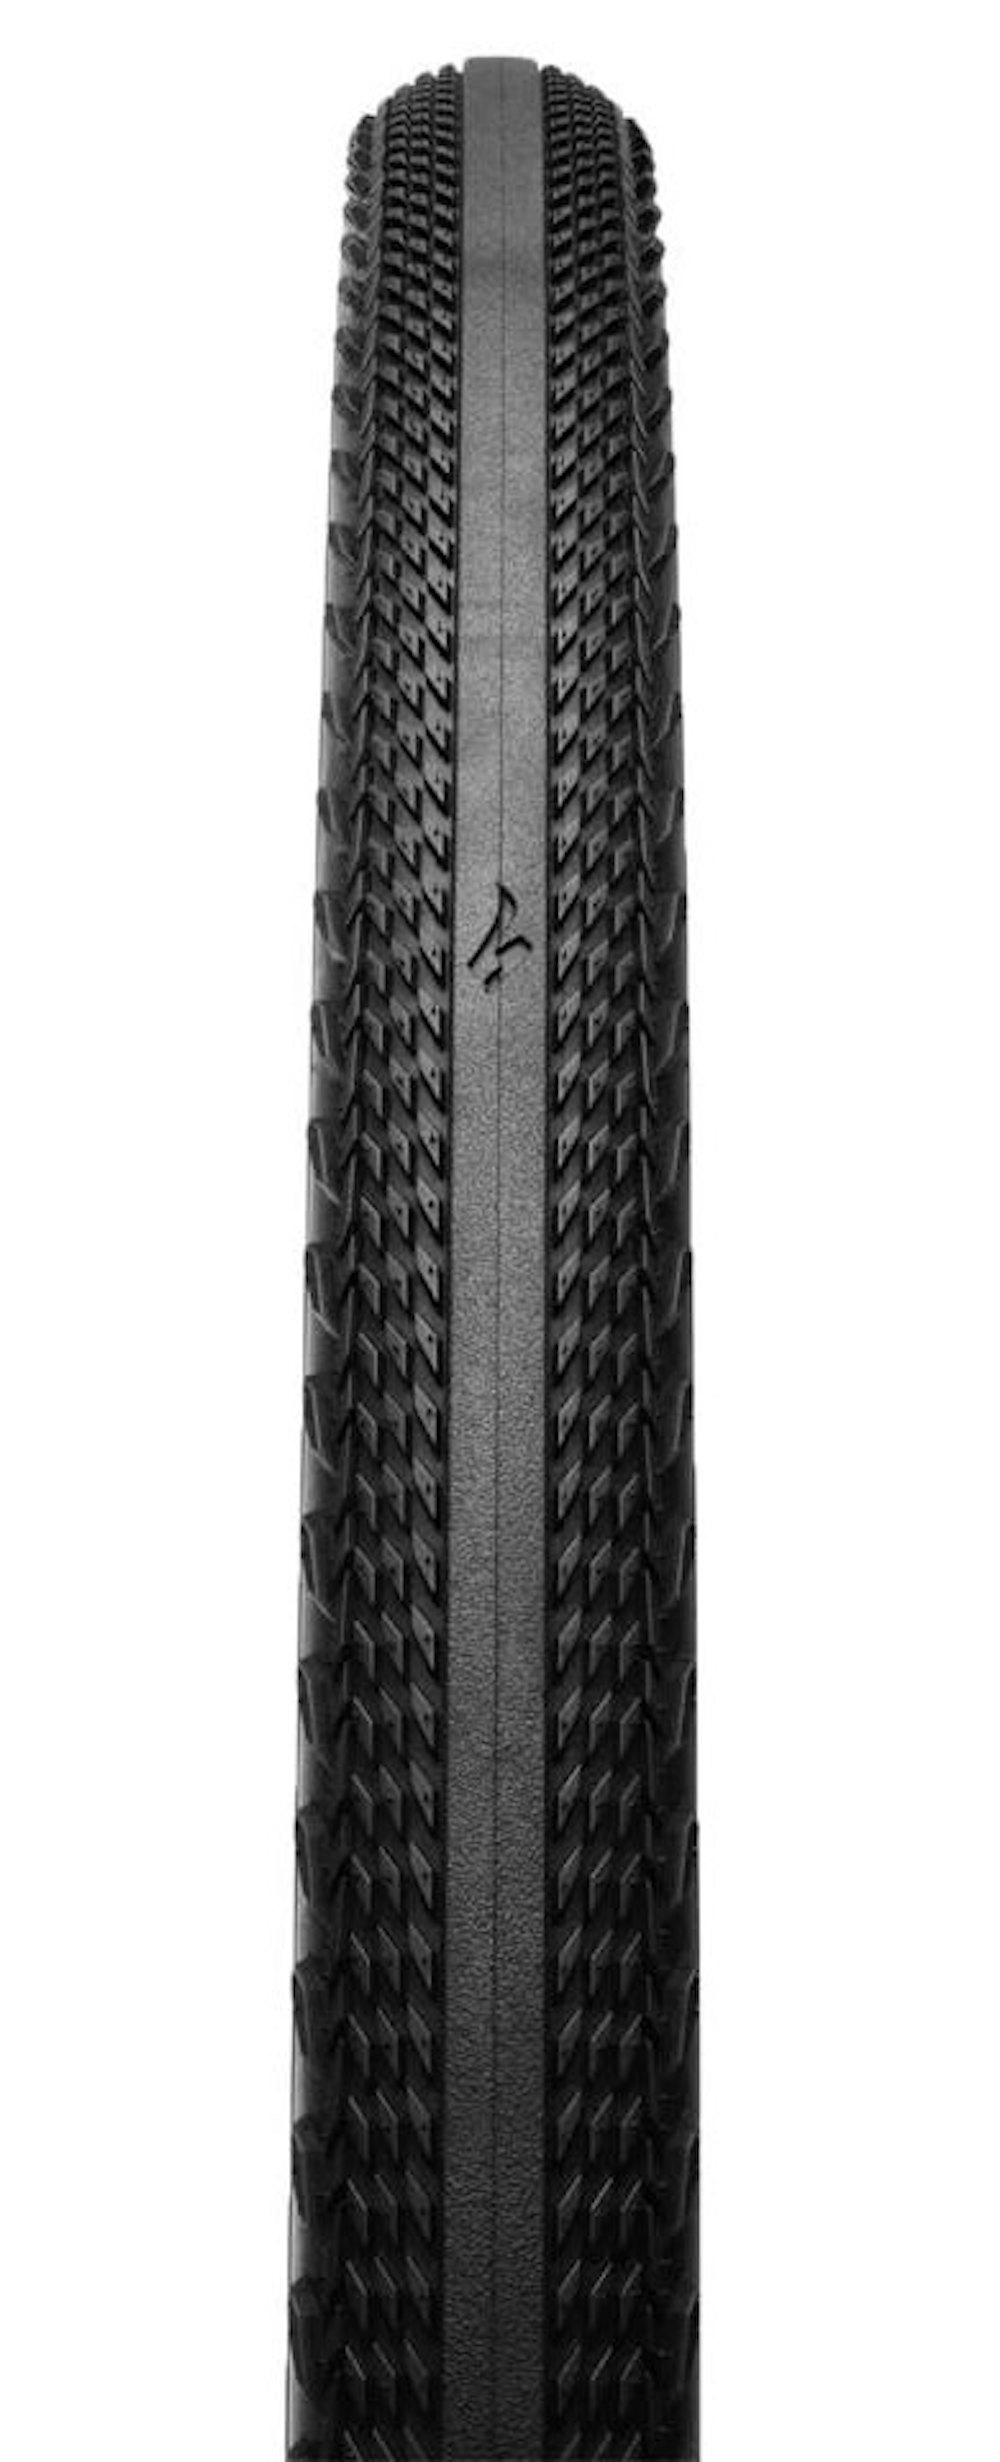 Specialized Pathfinder Pro 2Bliss Ready Tire